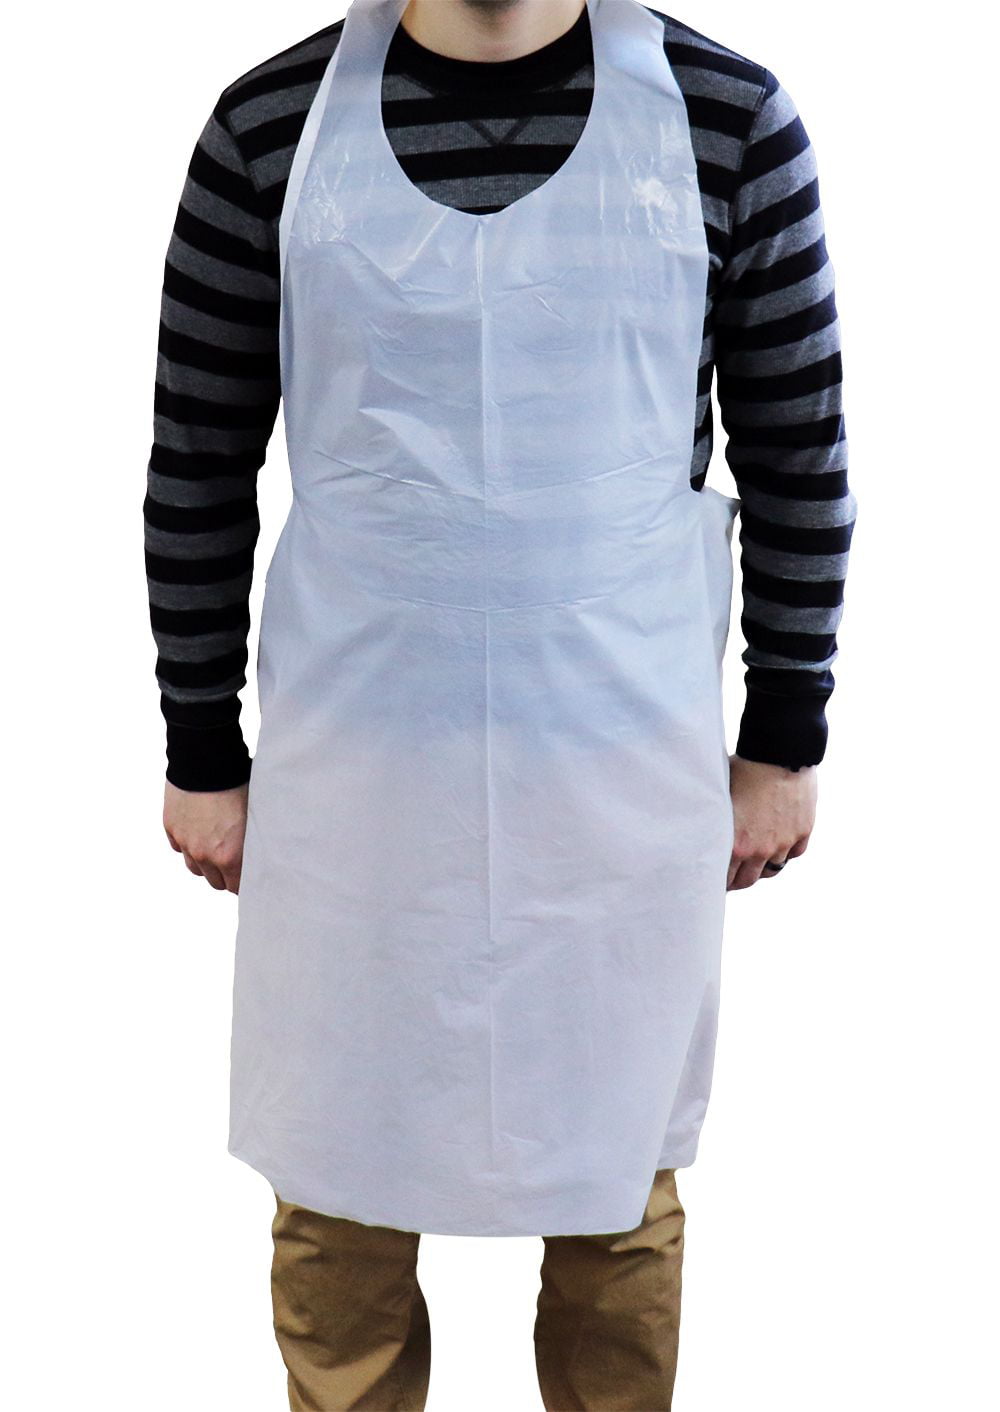 Shield Safety 28" x 46" White Disposable 2 Mil Apron w/Long Ties 4000 Pieces 